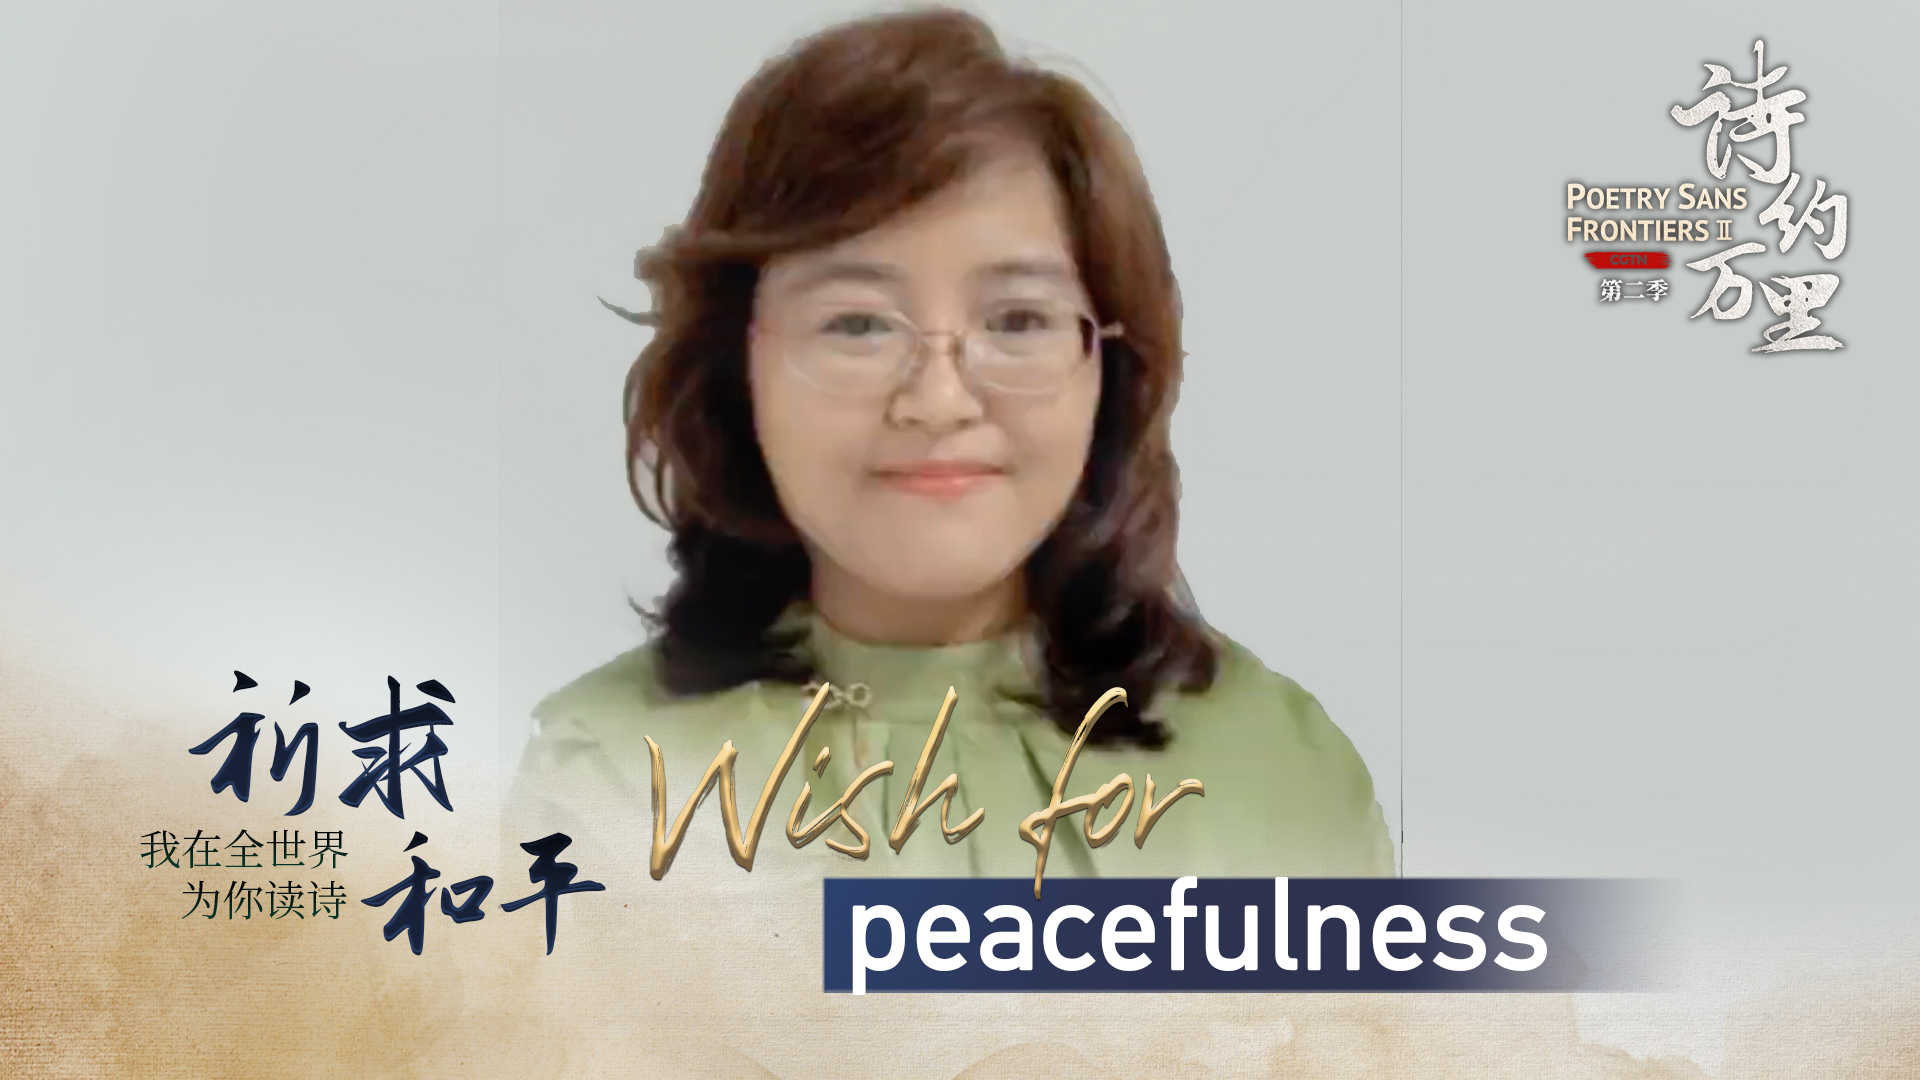 'Read a Poem': Su Thet Hmue reads 'Wish for Peacefulness' in Burmese